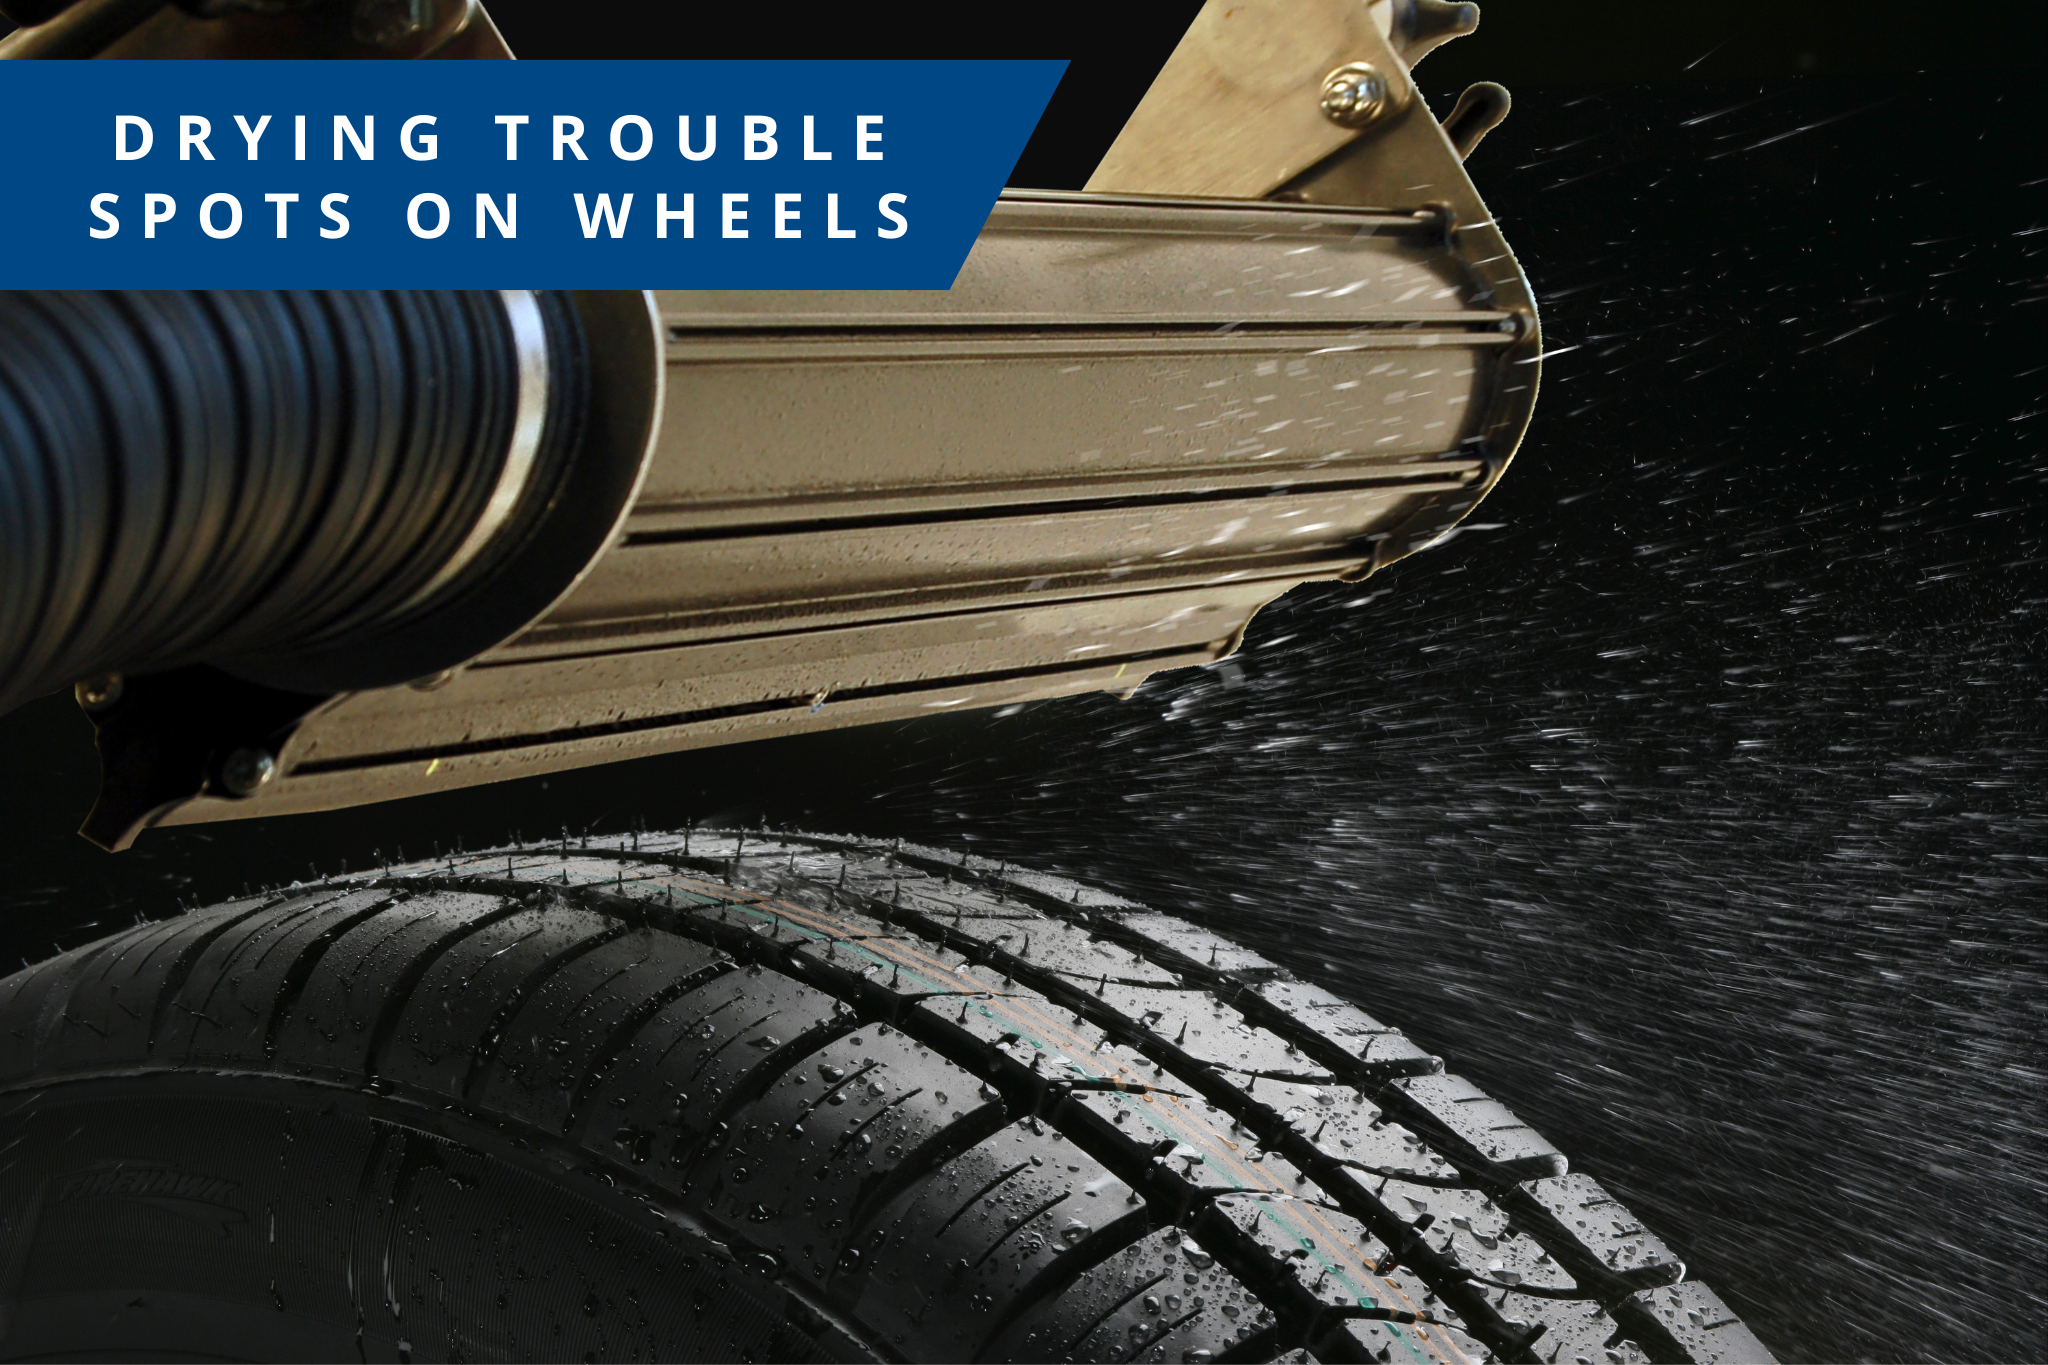 Case Study: Paxton’s Drying System Wheels In Savings For Automotive Manufacturer